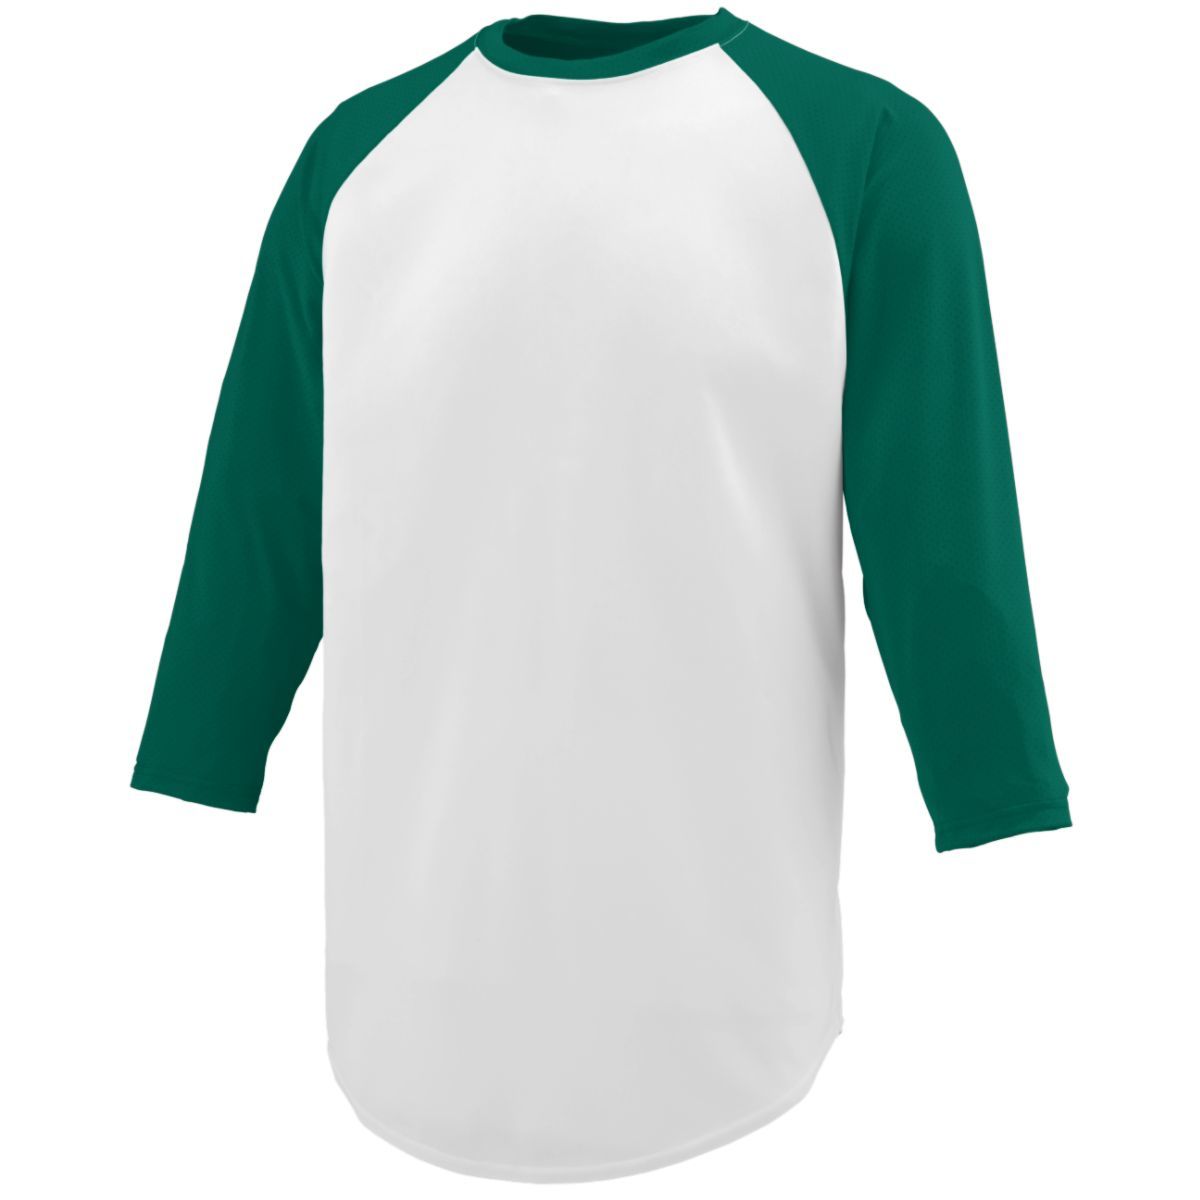 Augusta Sportswear Youth Nova Jersey in White/Dark Green  -Part of the Youth, Youth-Jersey, Augusta-Products, Baseball, Shirts, All-Sports, All-Sports-1 product lines at KanaleyCreations.com